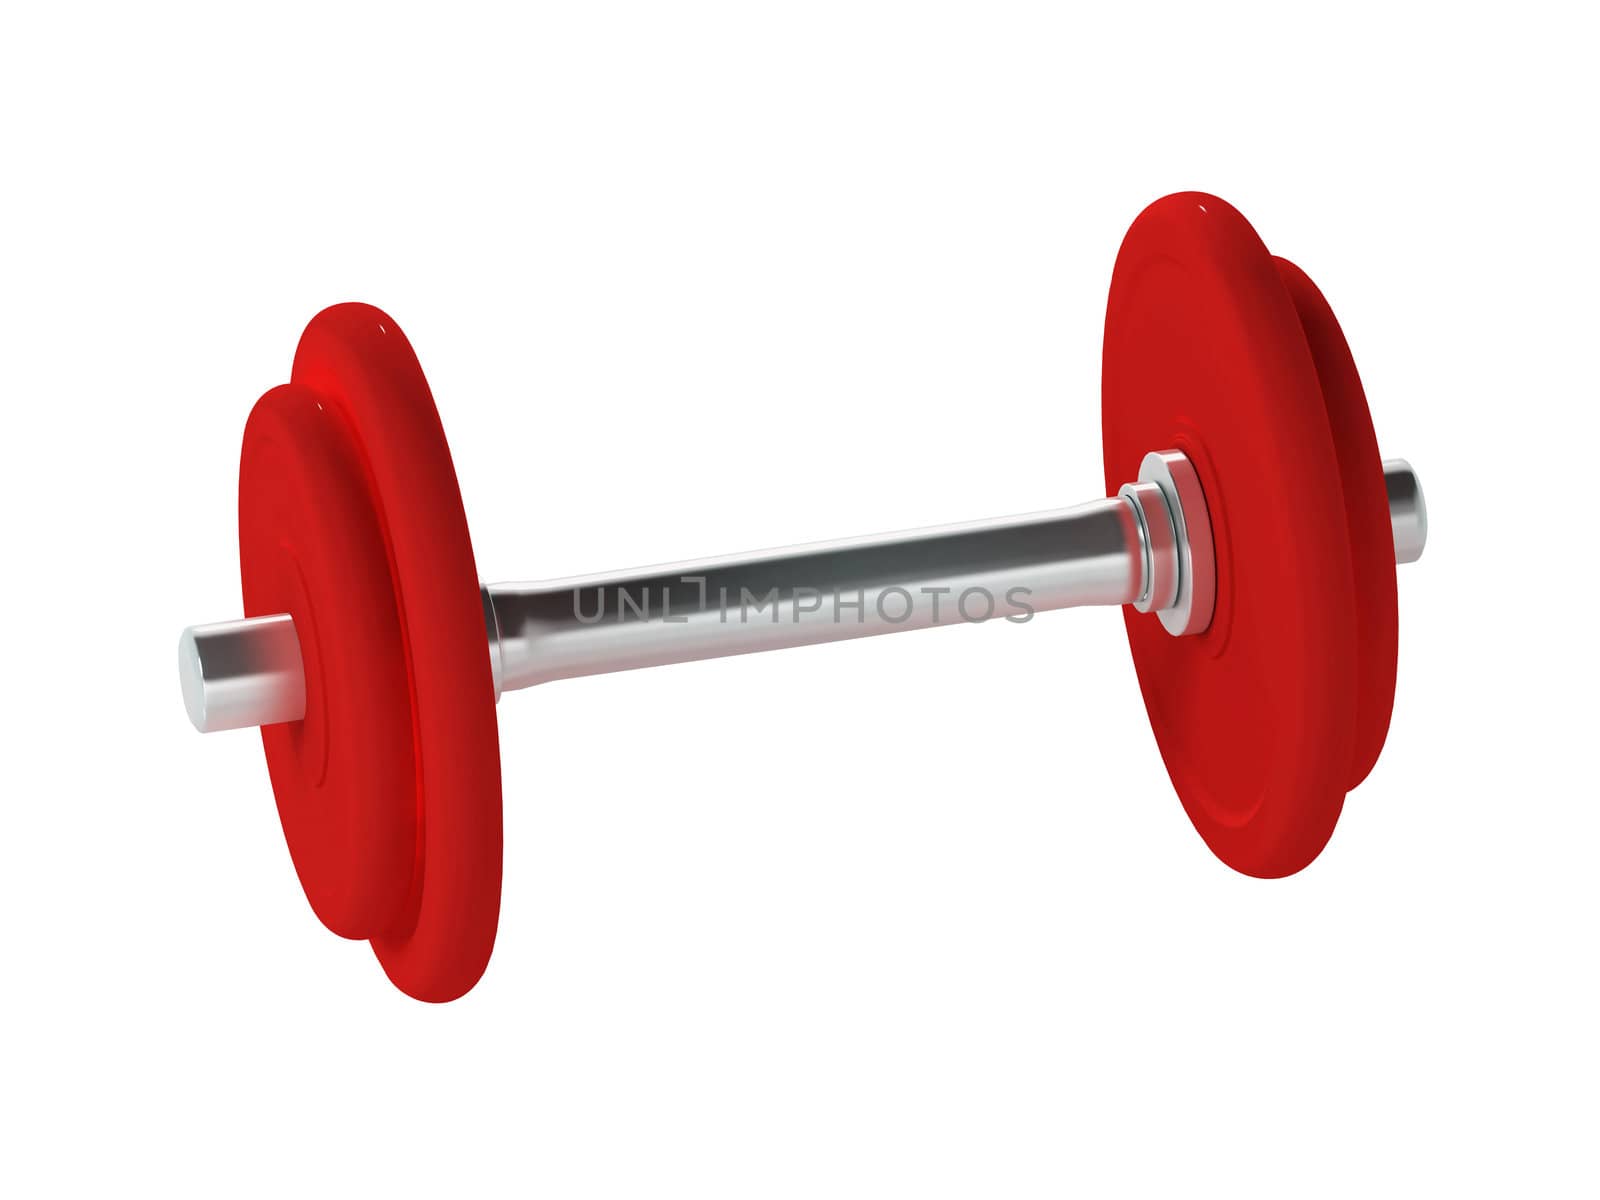 Red dumbbell. This image contains clipping path for easy background removing.